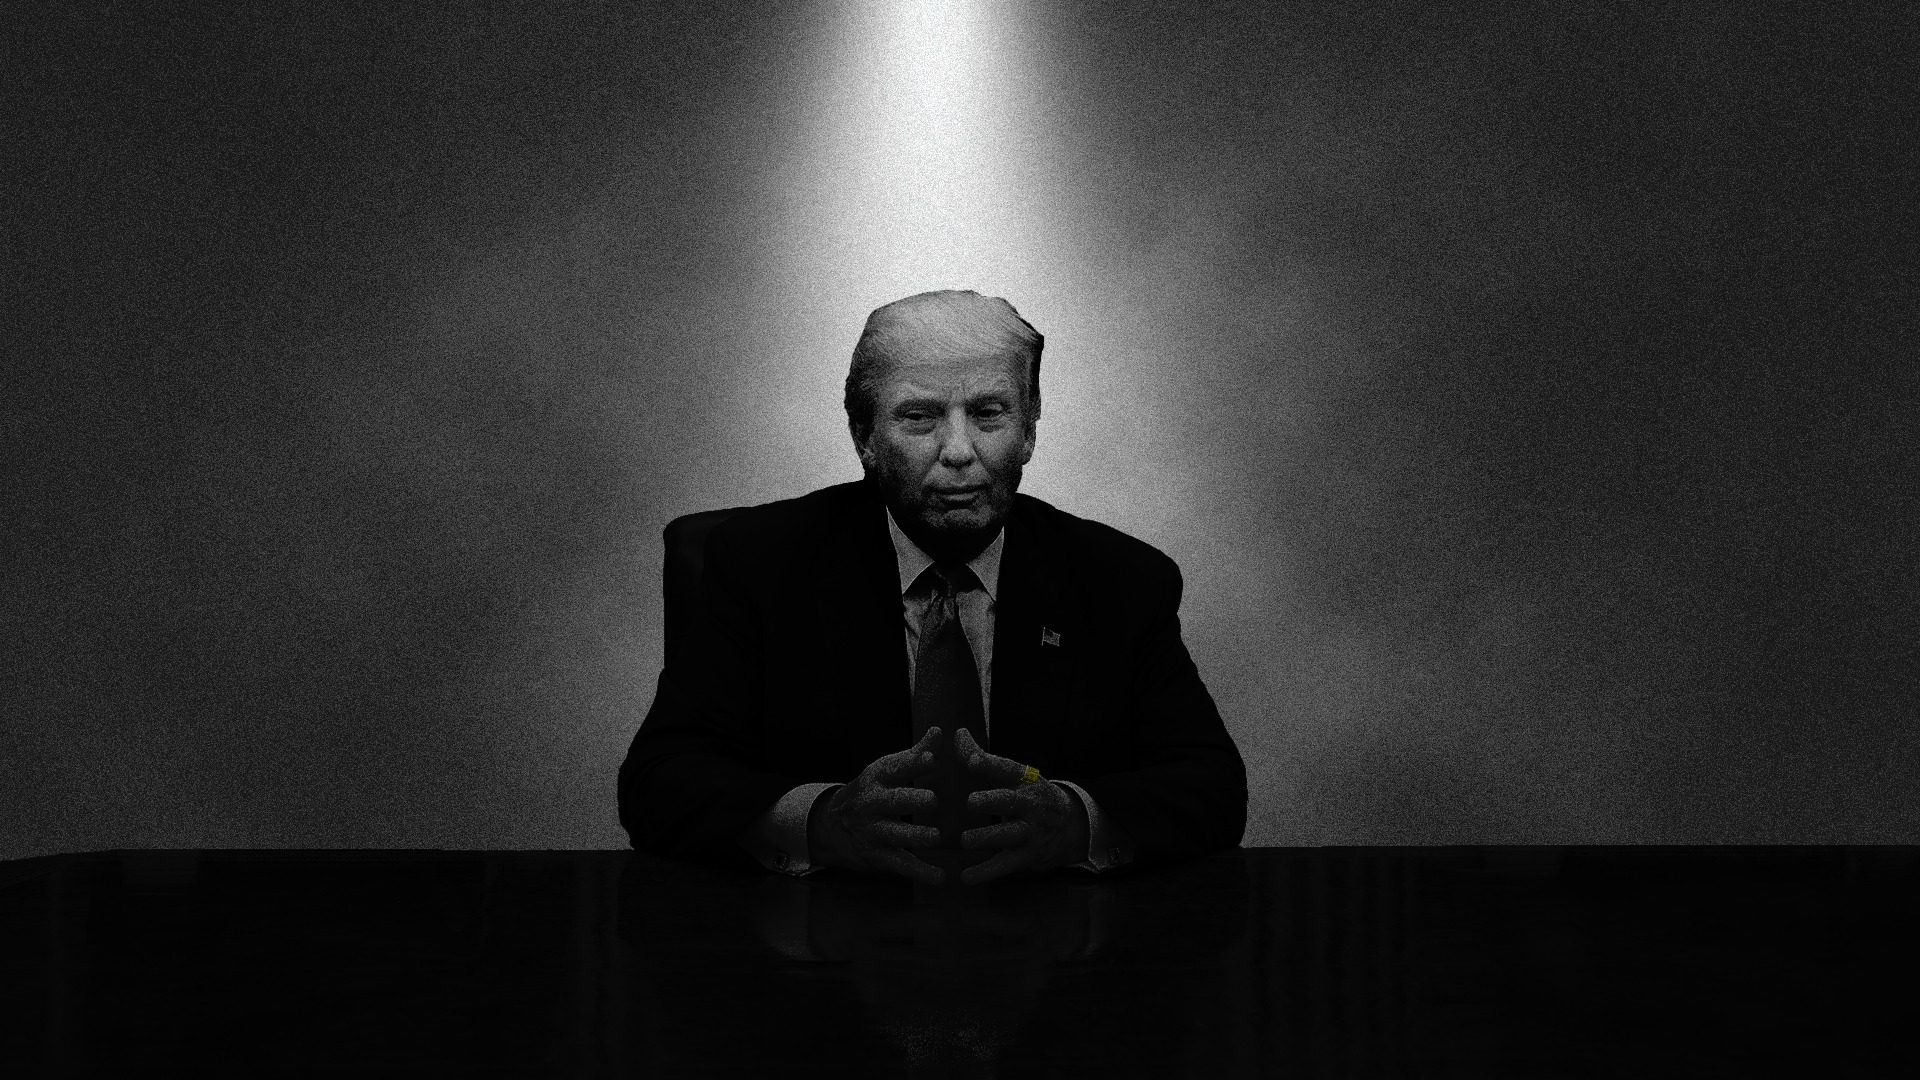 Black and white noir photo illustration of President Trump behind a desk with an overhead light.